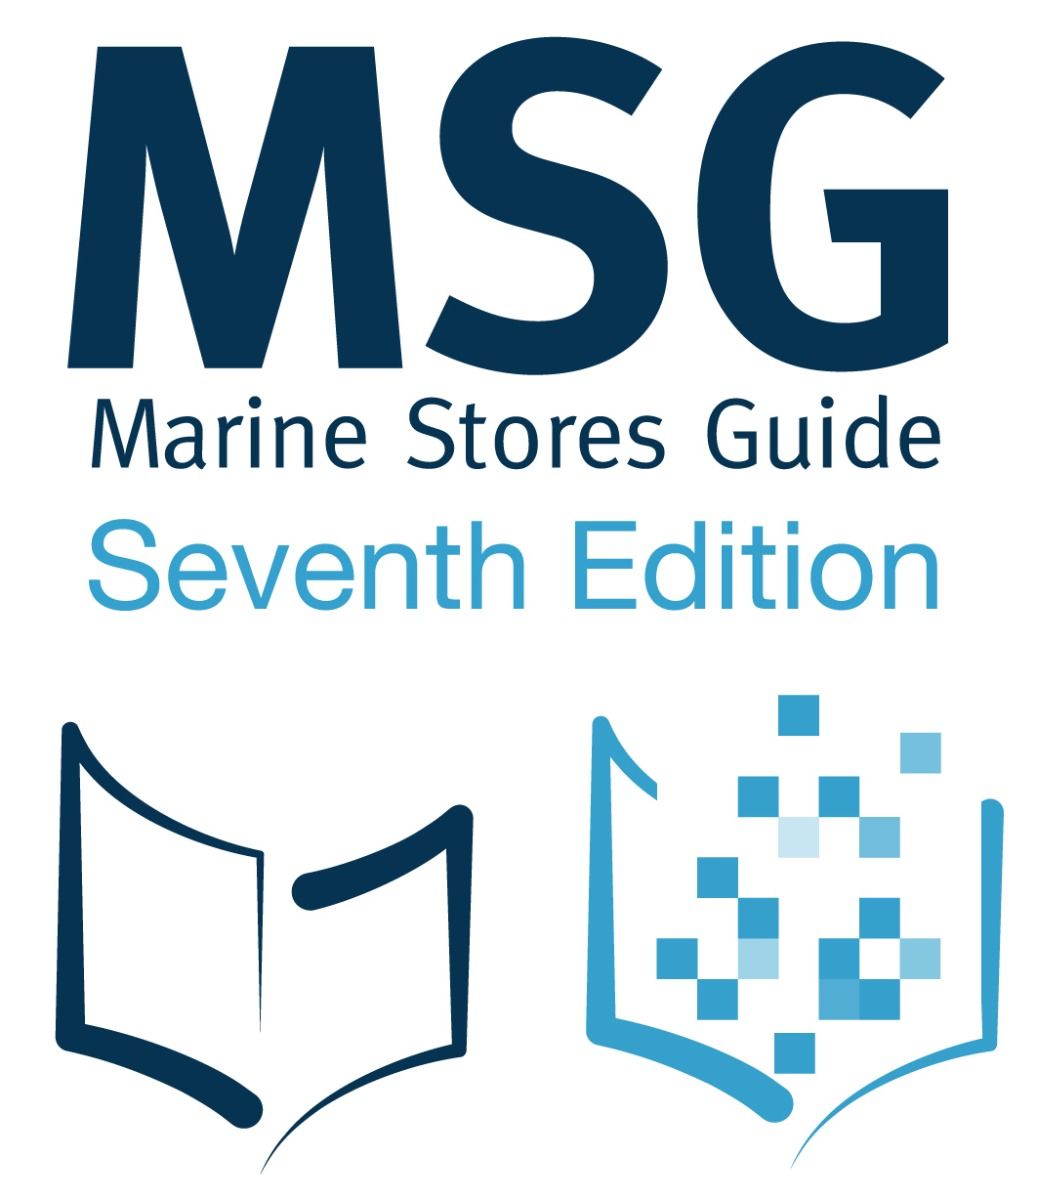 IMPA Marine Stores Guide (7th Edition)